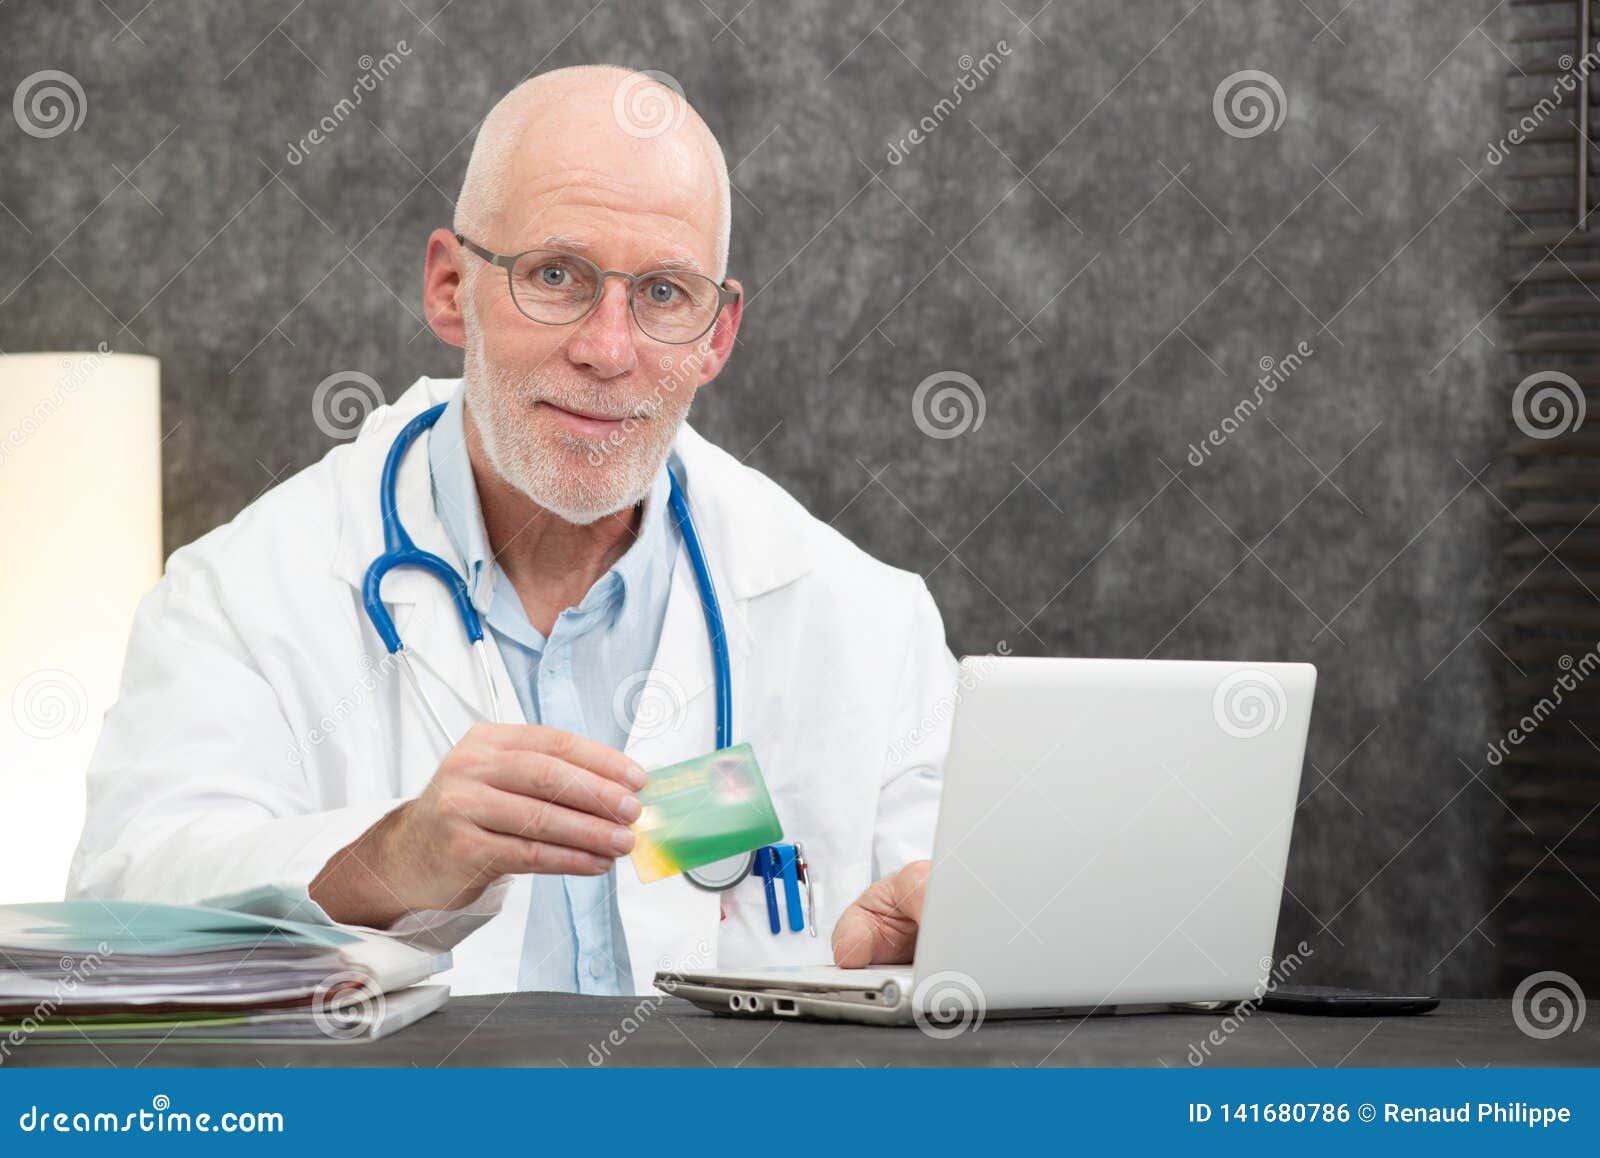 Senior Bearded Doctor with Health Insurance Card Stock Photo - Image of ...